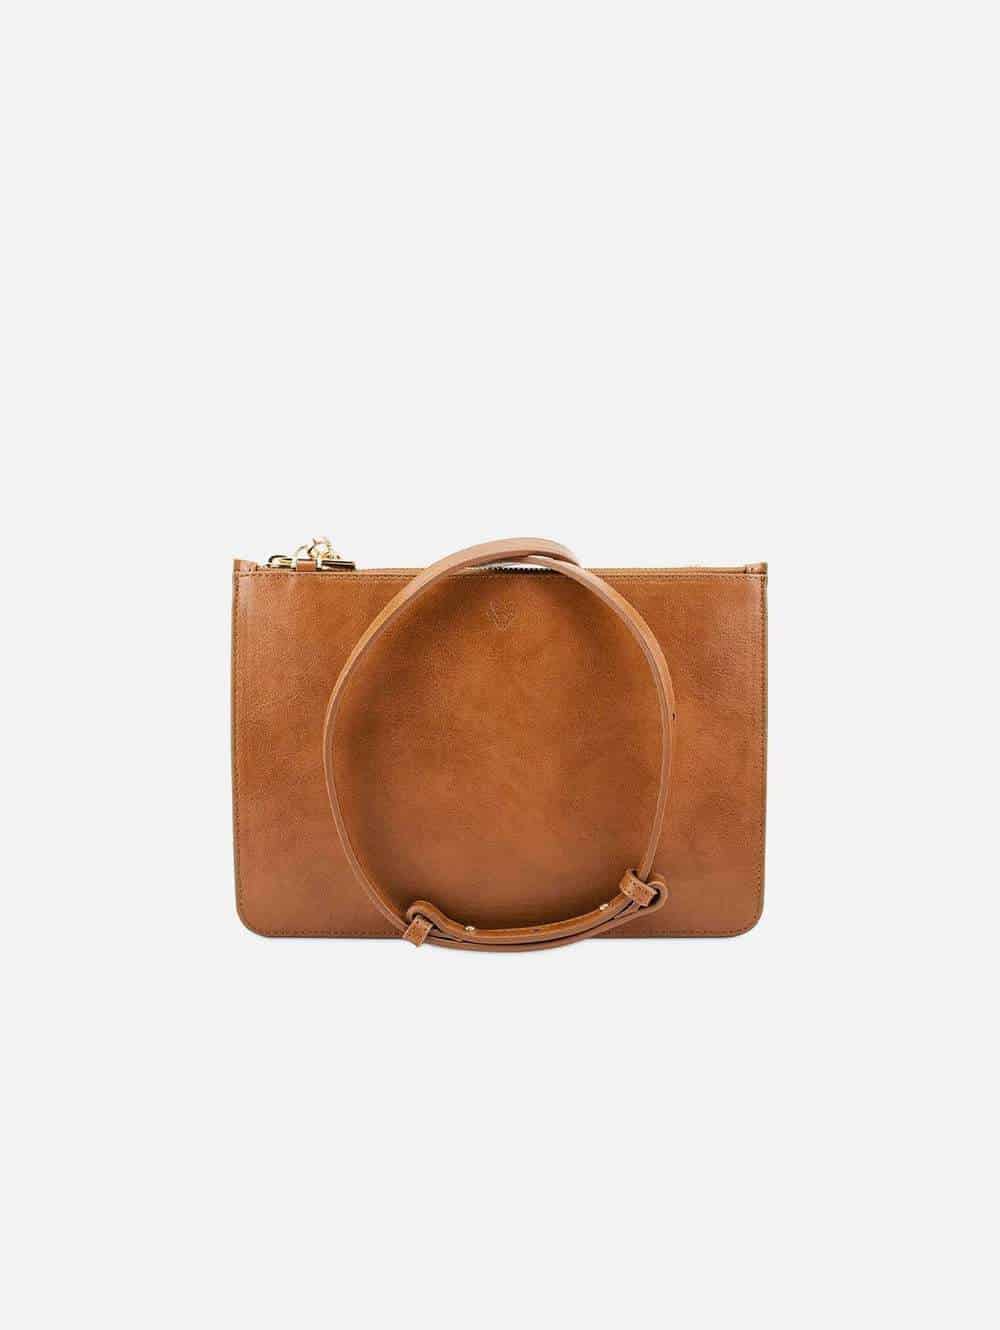 Brown vegan leather crossbody bag from Watson and Wolfe